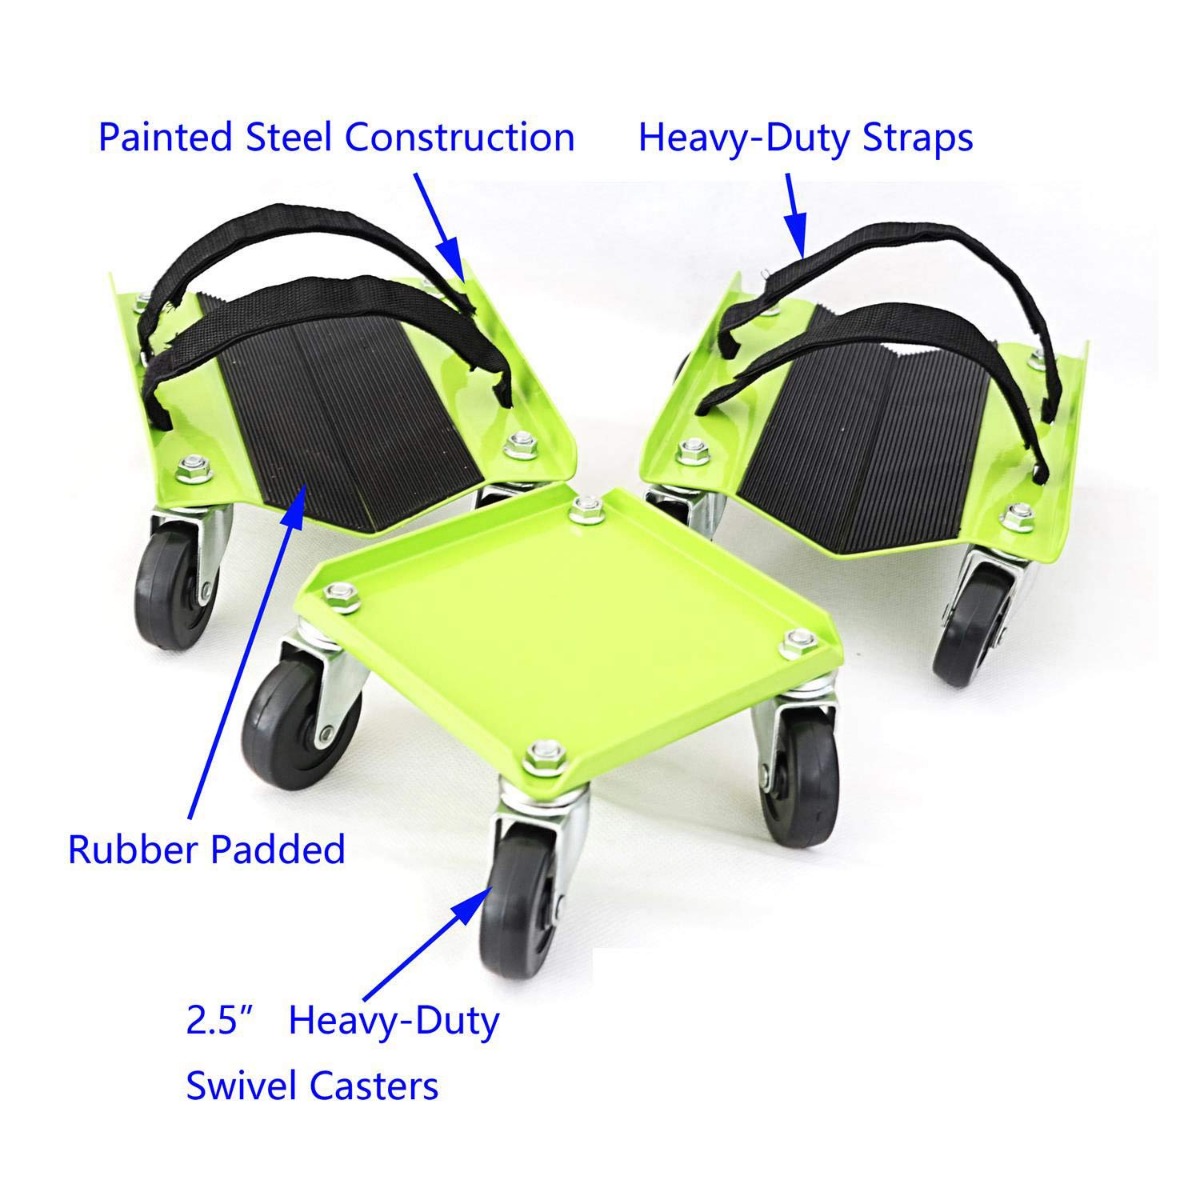 KASTFORCE KF2014 Snowmobile Dolly Heavy Duty 1500Lbs V-Slide With Rubber Pad Protecting Skis and 2 Pairs of Heavy Duty Straps Firmly Attaching on Skis-7512